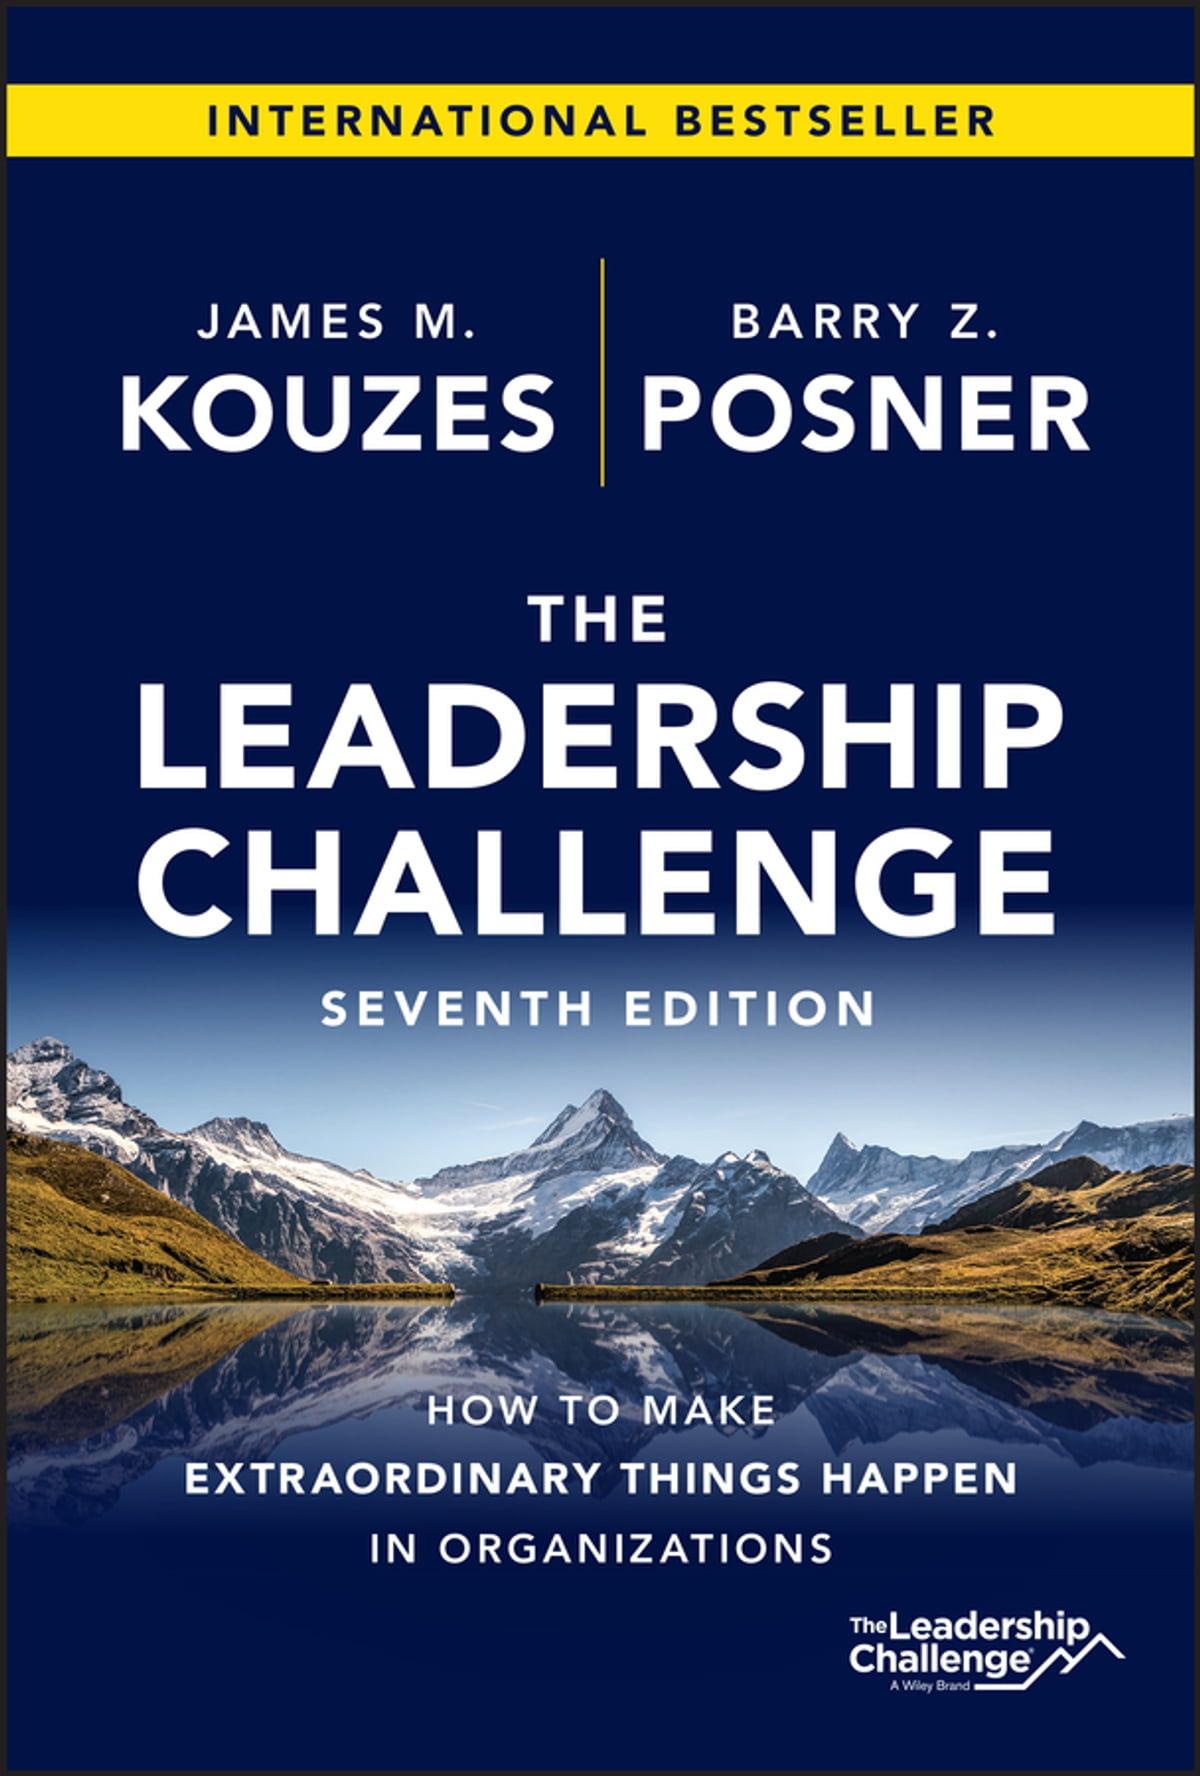 The Leadership Challenge with Barry Posner